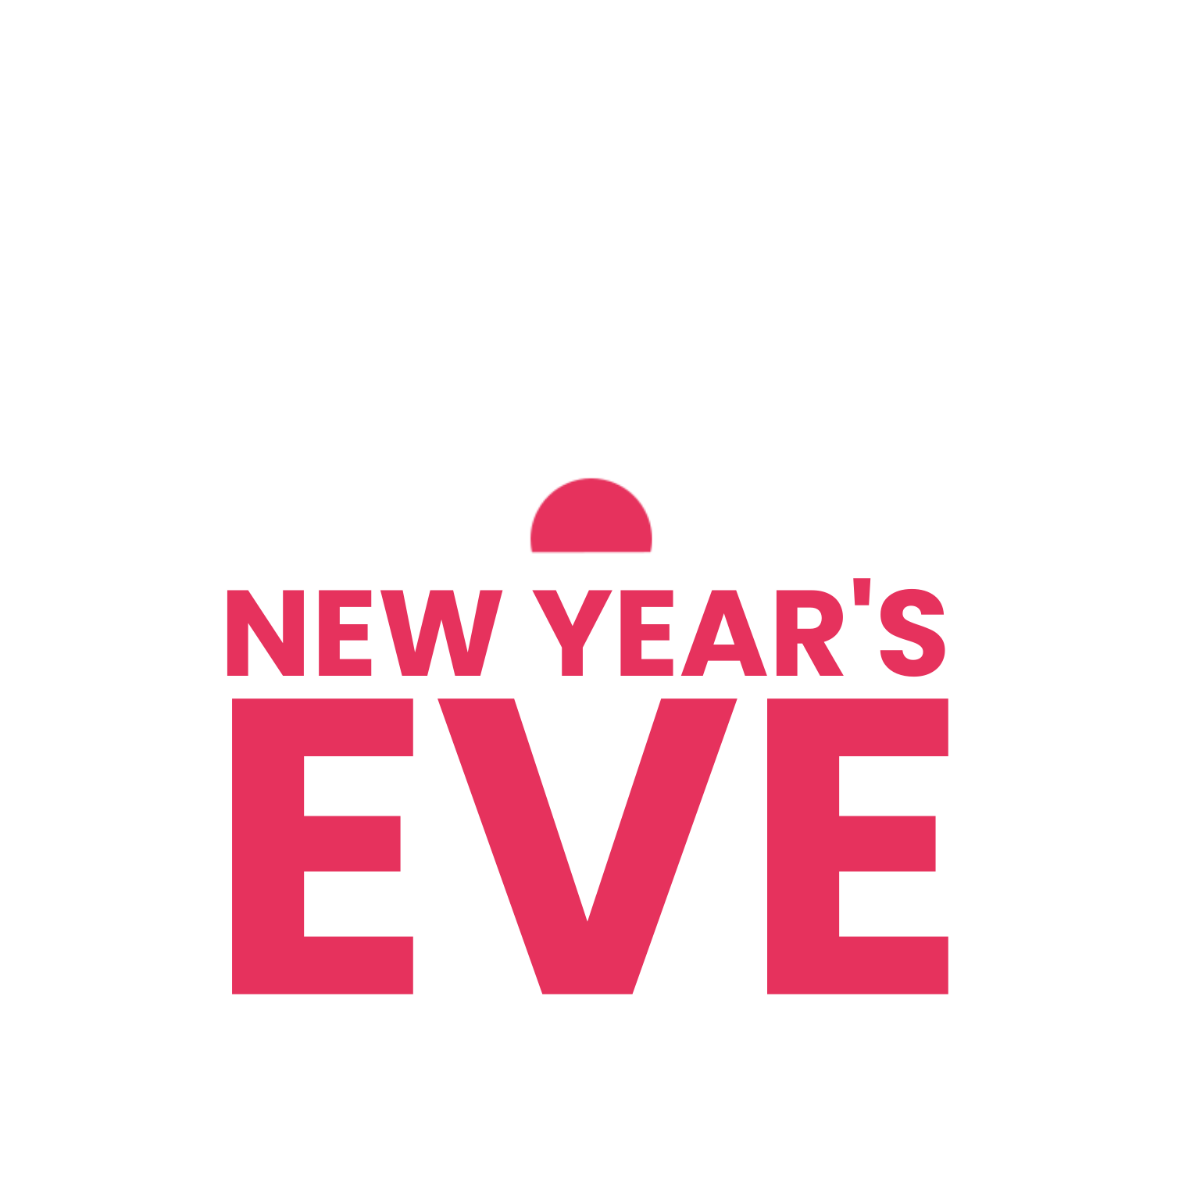 Free New Year's Eve Fireworks Clipart Template